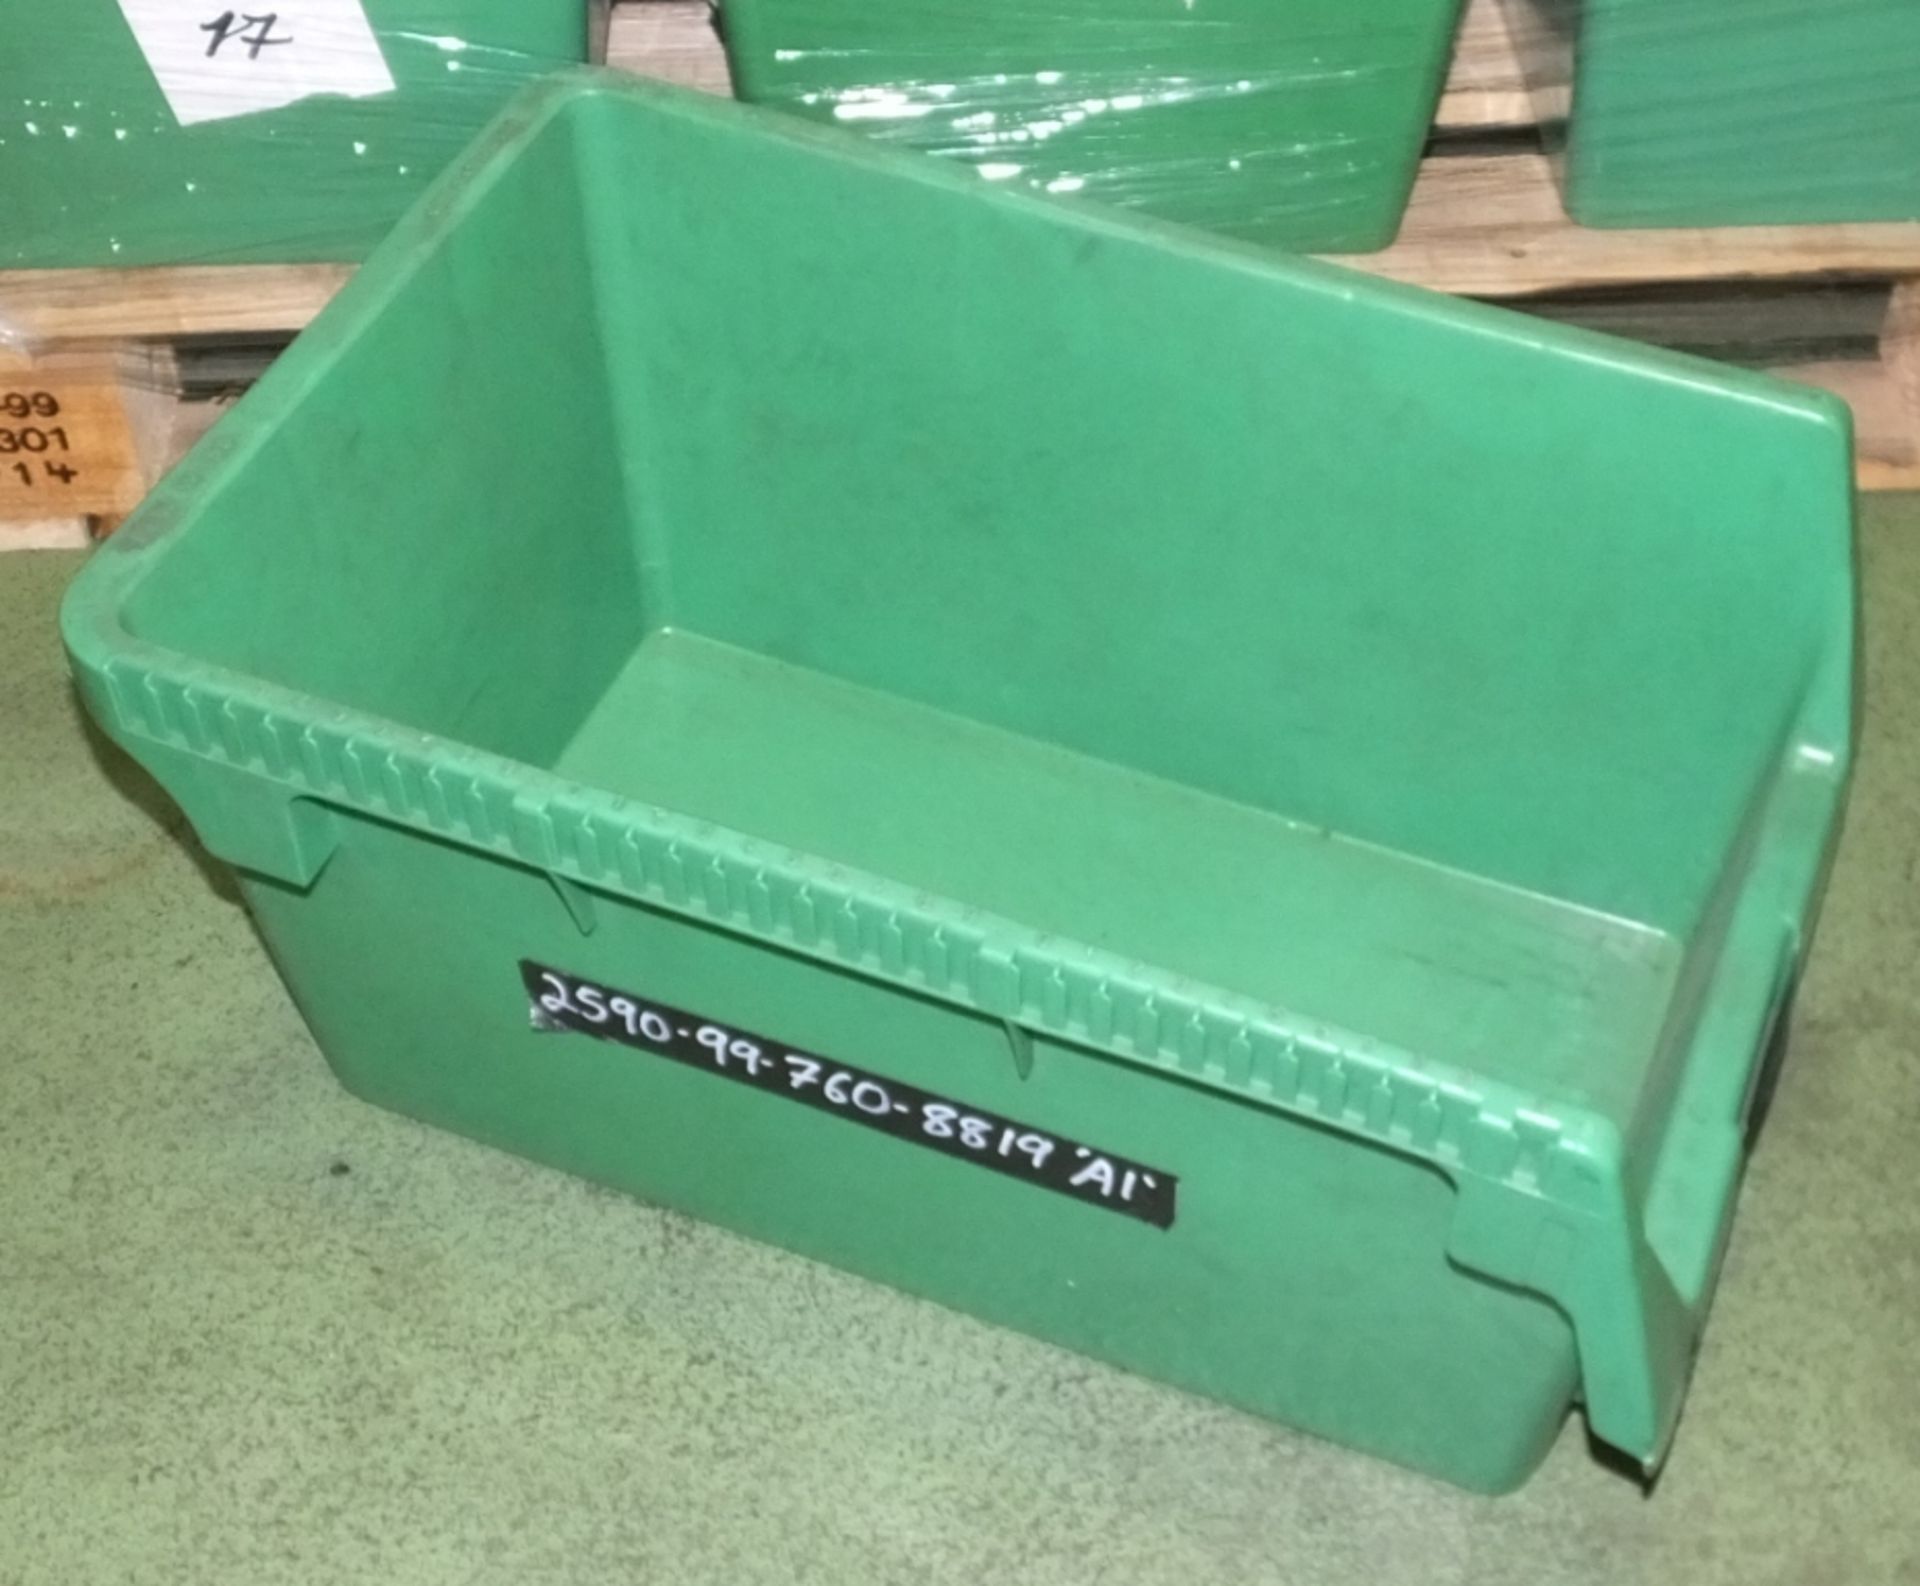 95x Plastic storage bins / trays - non stackable - Image 2 of 2